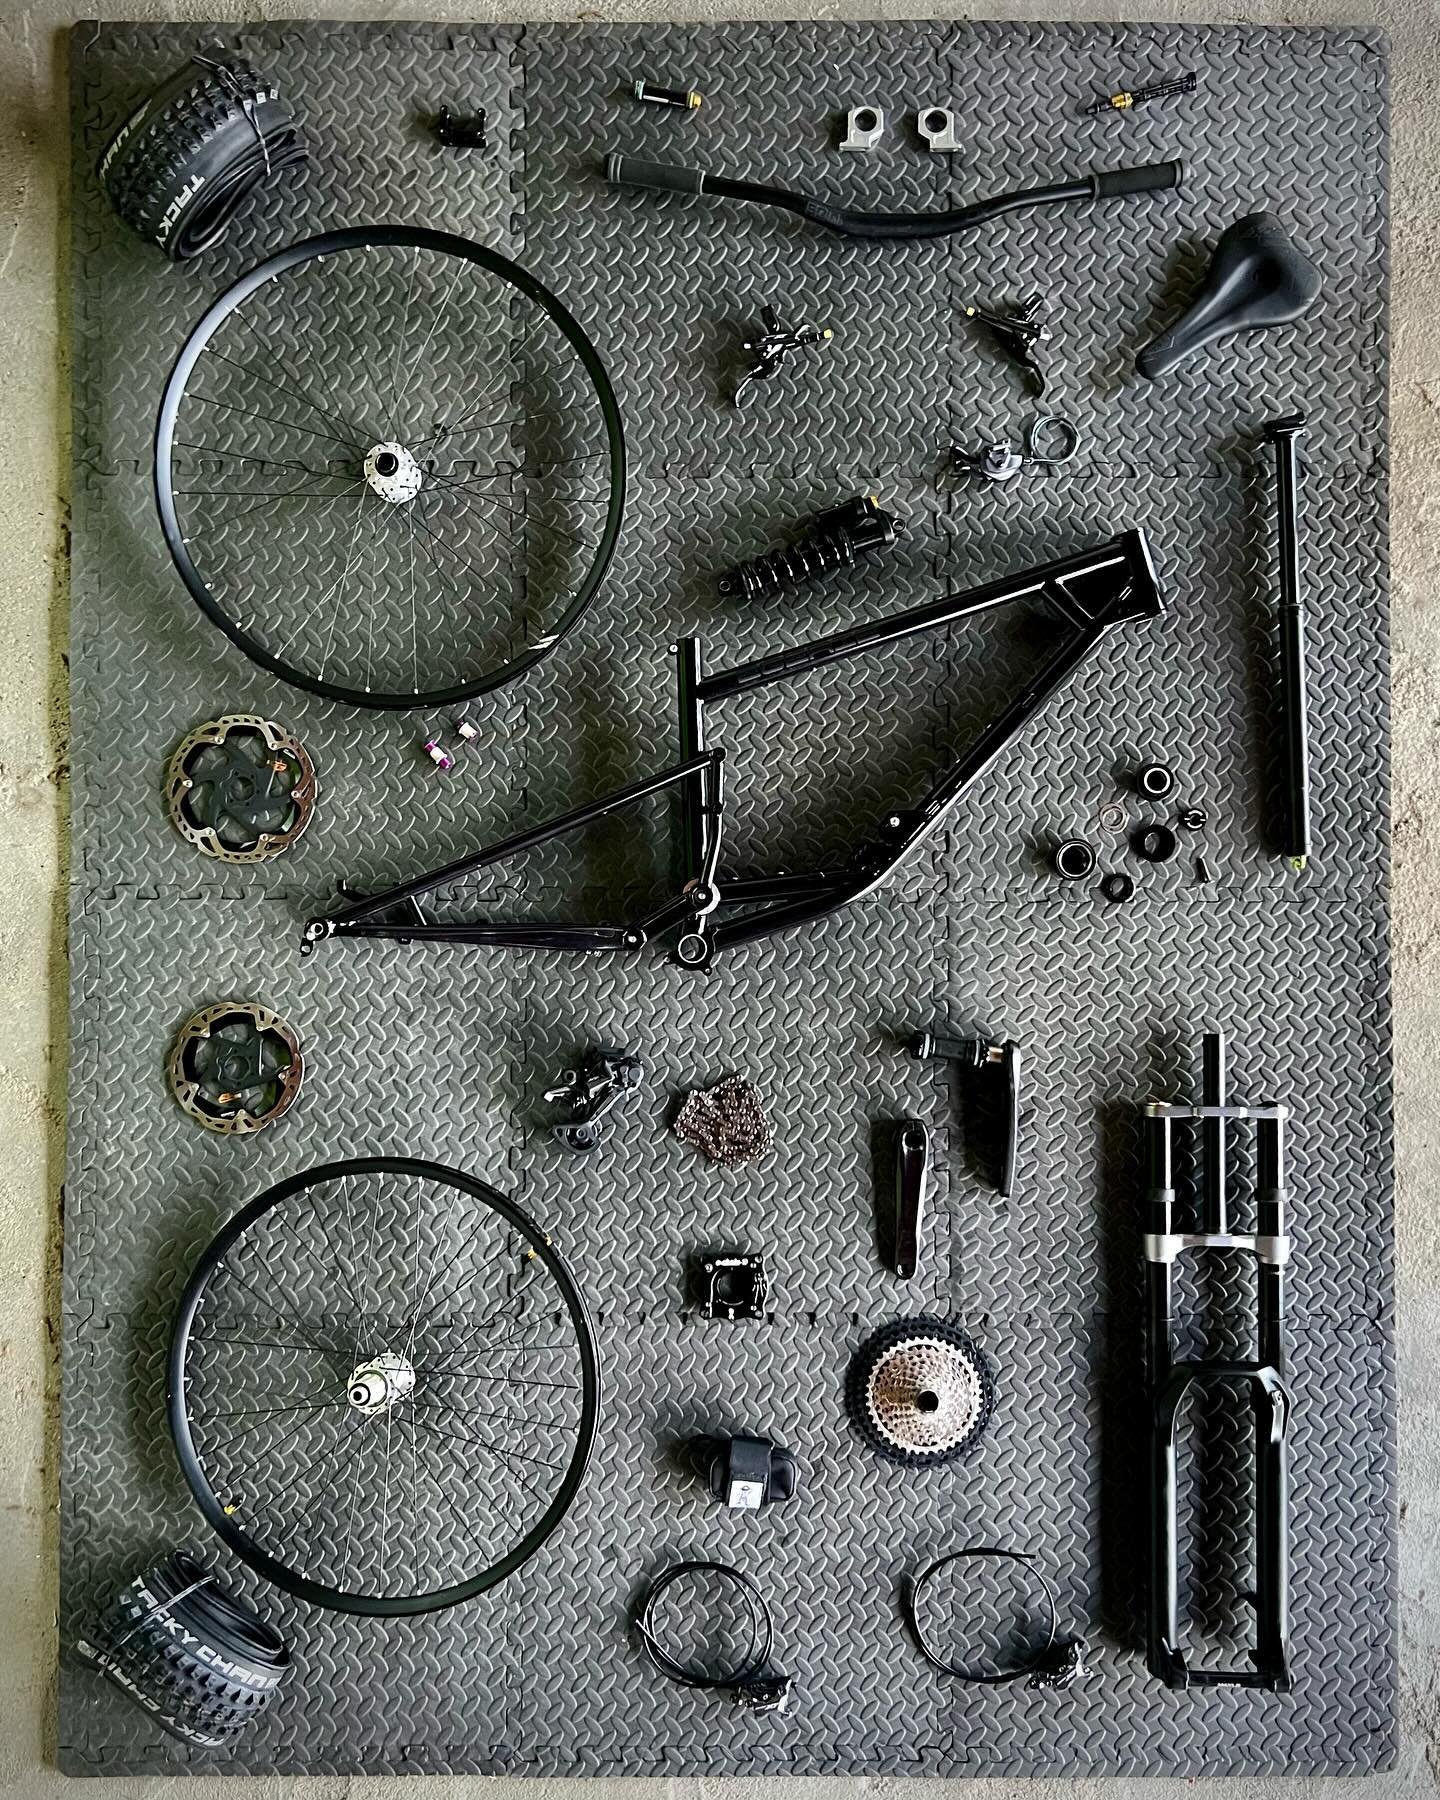 Pile o&rsquo; parts 

&mdash;

My AstonMTB Mission:

I&rsquo;m here to give the most independent bike reviews online. Starting with stock equipment then trying to get the absolute best performance out of it.

All products are bought by me at full pri